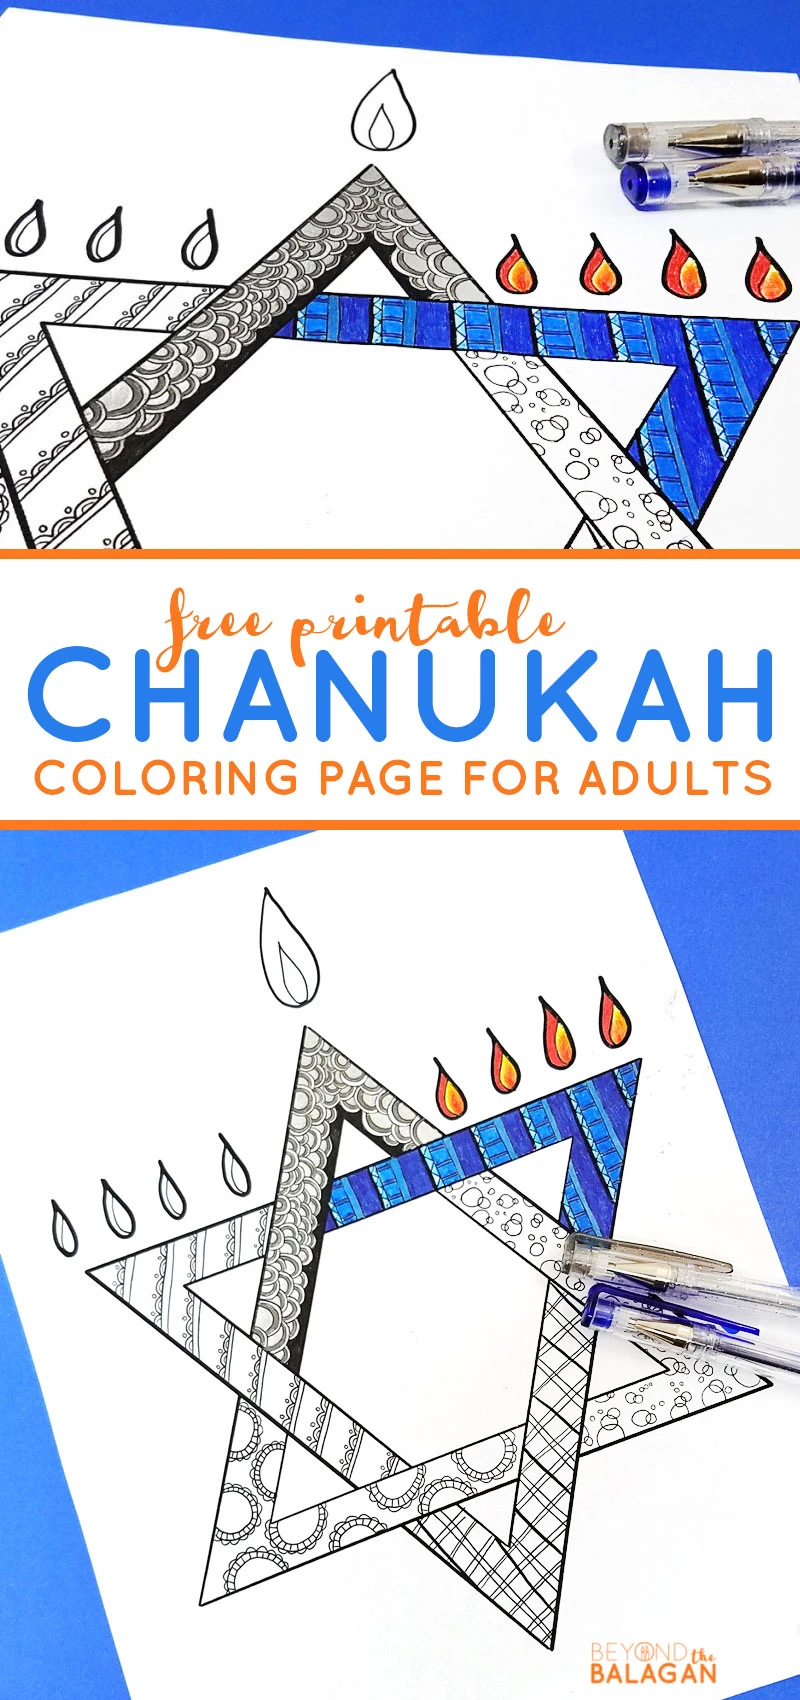 The chanukah coloring page for adults is so beautiful - grab your free printable Hanukkah coloring page for adults today - great craft idea for a party or event. Perfect for teens and tweens too! #Chanukah #hanukkah 